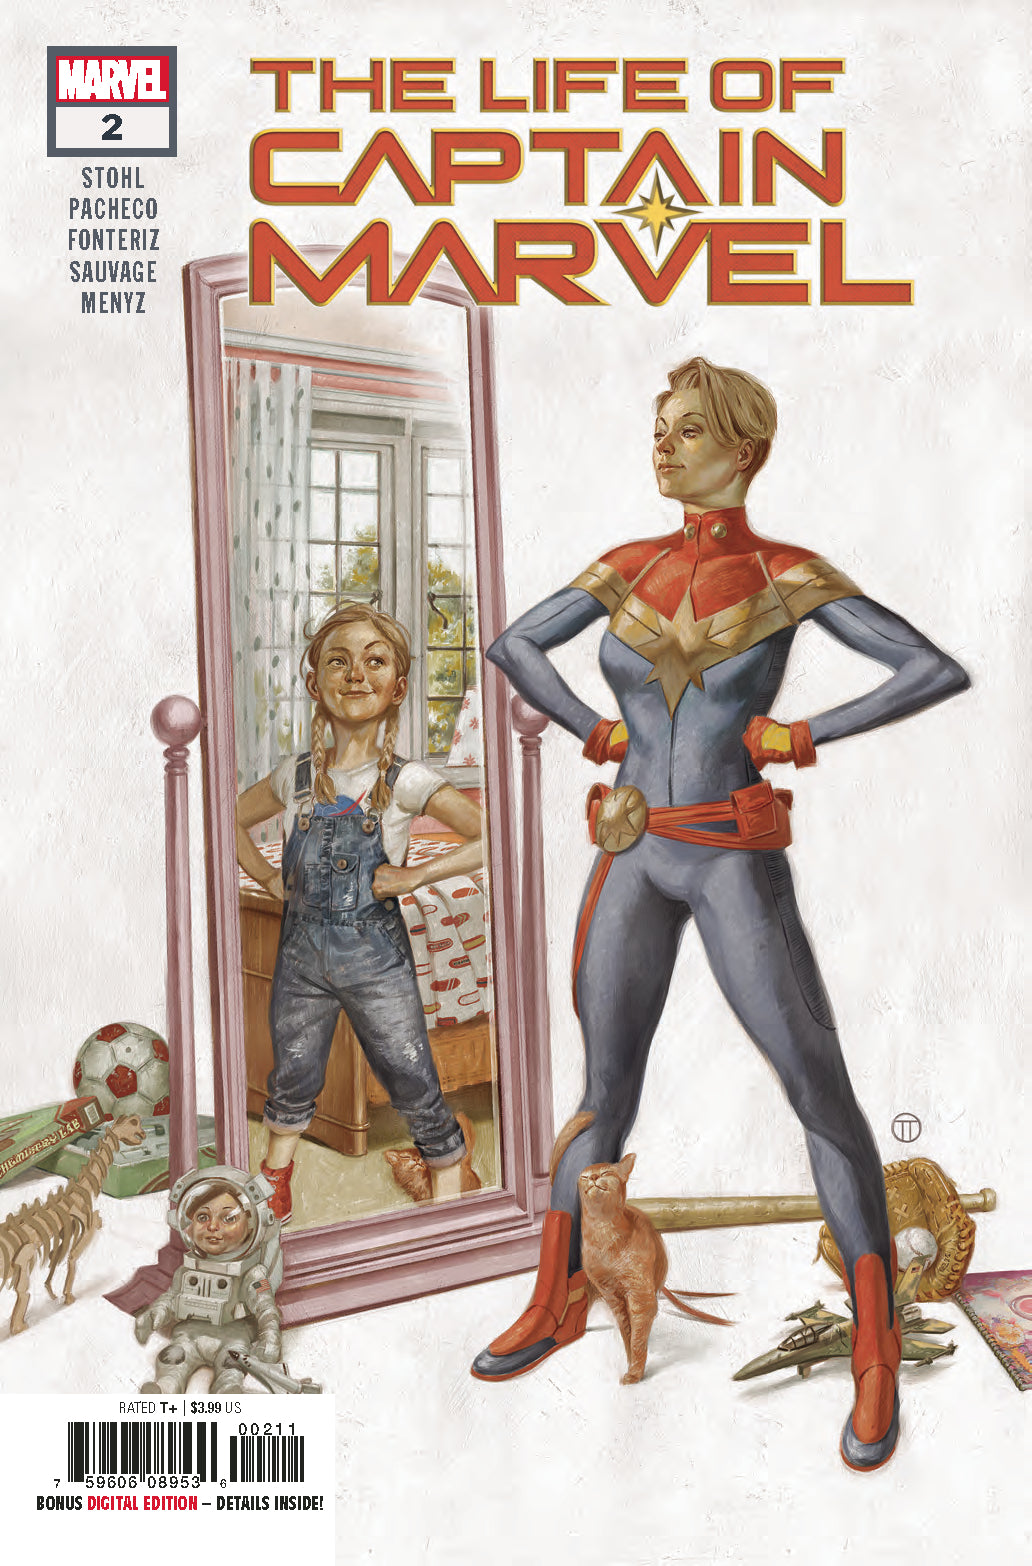 LIFE OF CAPTAIN MARVEL #2 (OF 5) COVER